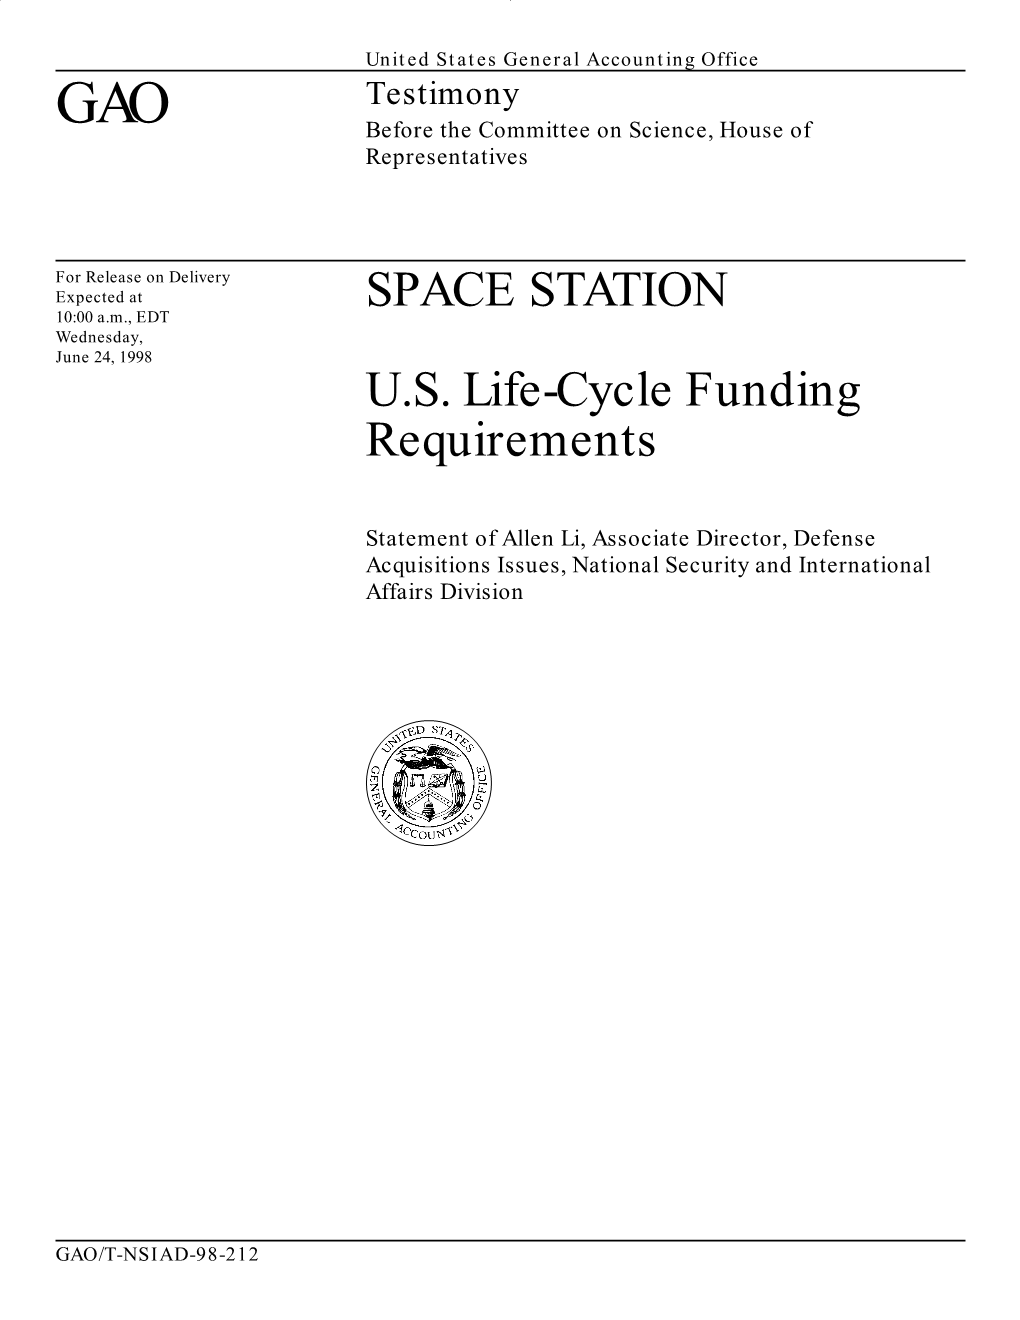 SPACE STATION: U.S. Life-Cycle Funding Requirements GAO/T